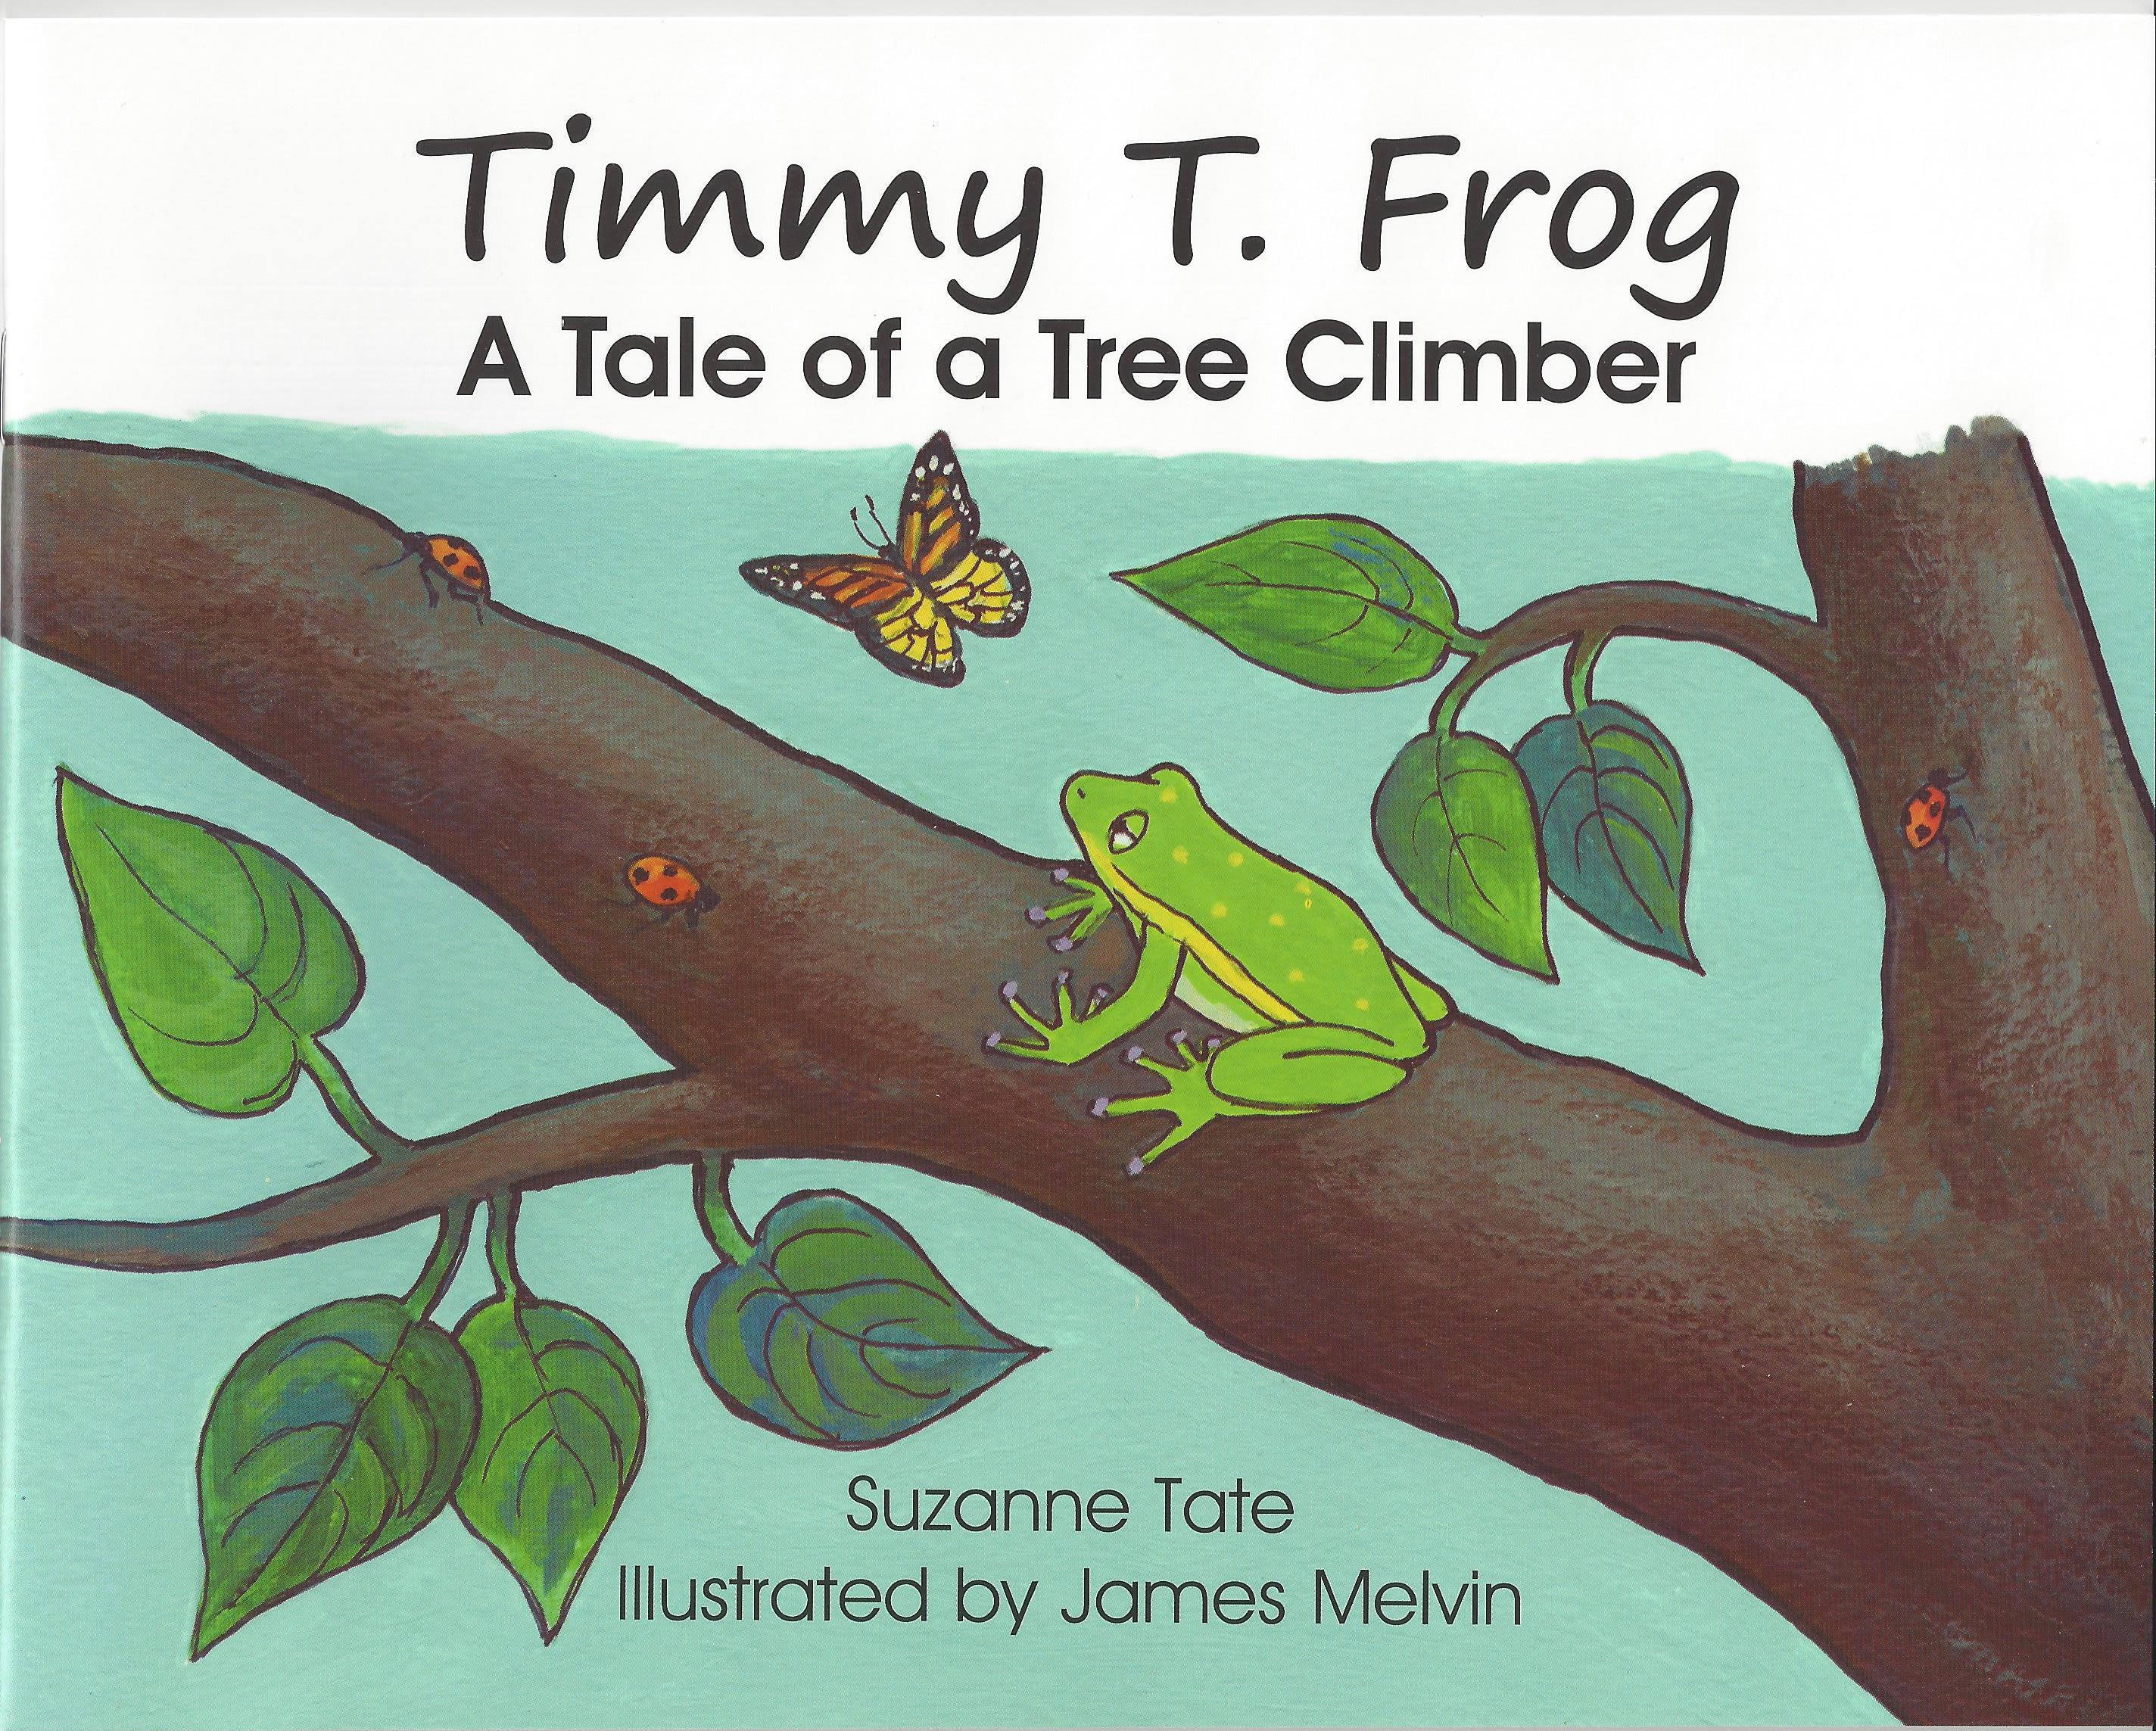 Timmy T. Frog